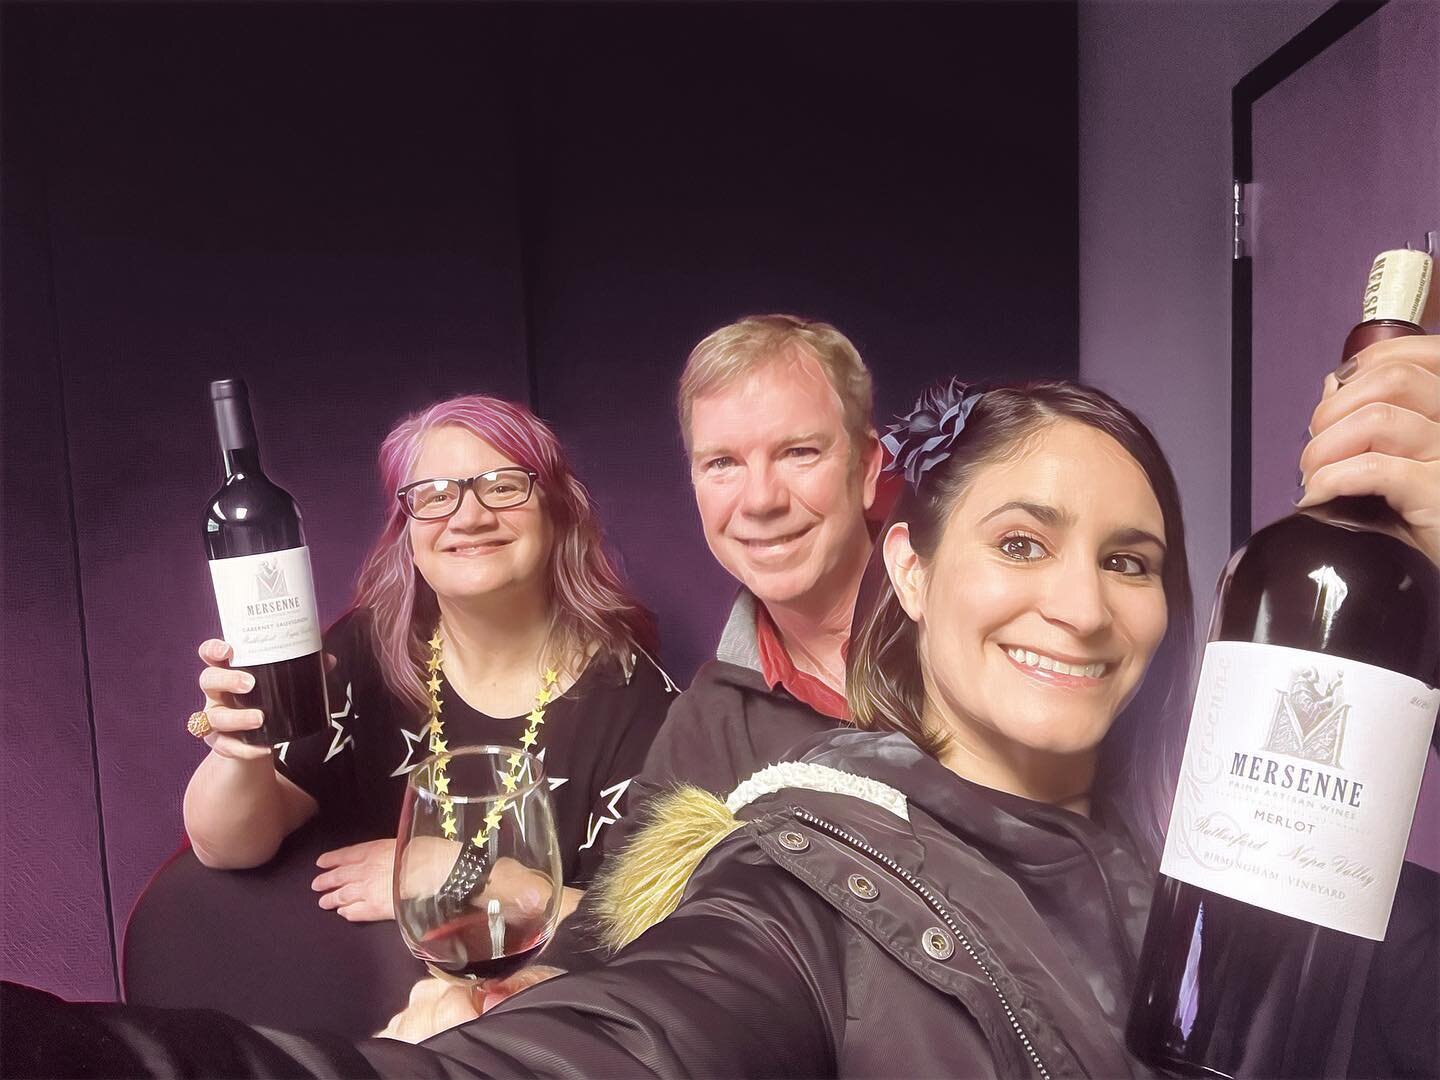 RNV 92! 

In this episode we talk with Mitch Rice, winemaker at Mersenne Wines. 

This boutique winery chose French Renaissance monk Marin Mersenne as their namesake, to represent their approach to winemaking. Marin Mersenne discovered the formula to